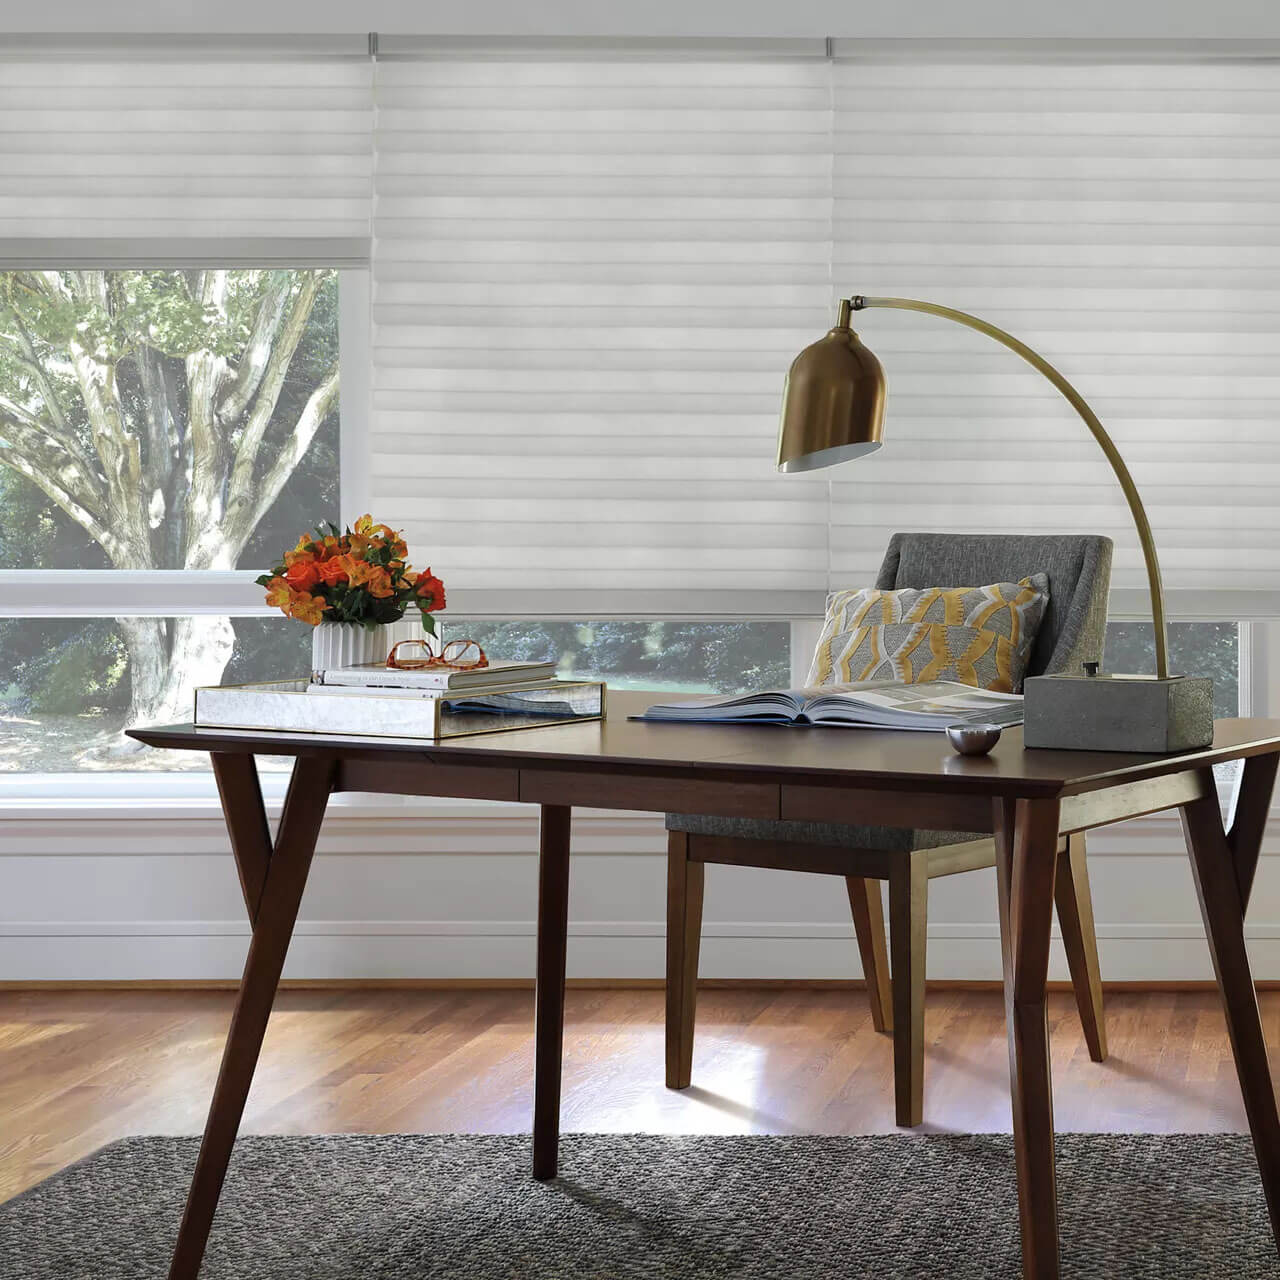 Window covering in study room | The L&L Company